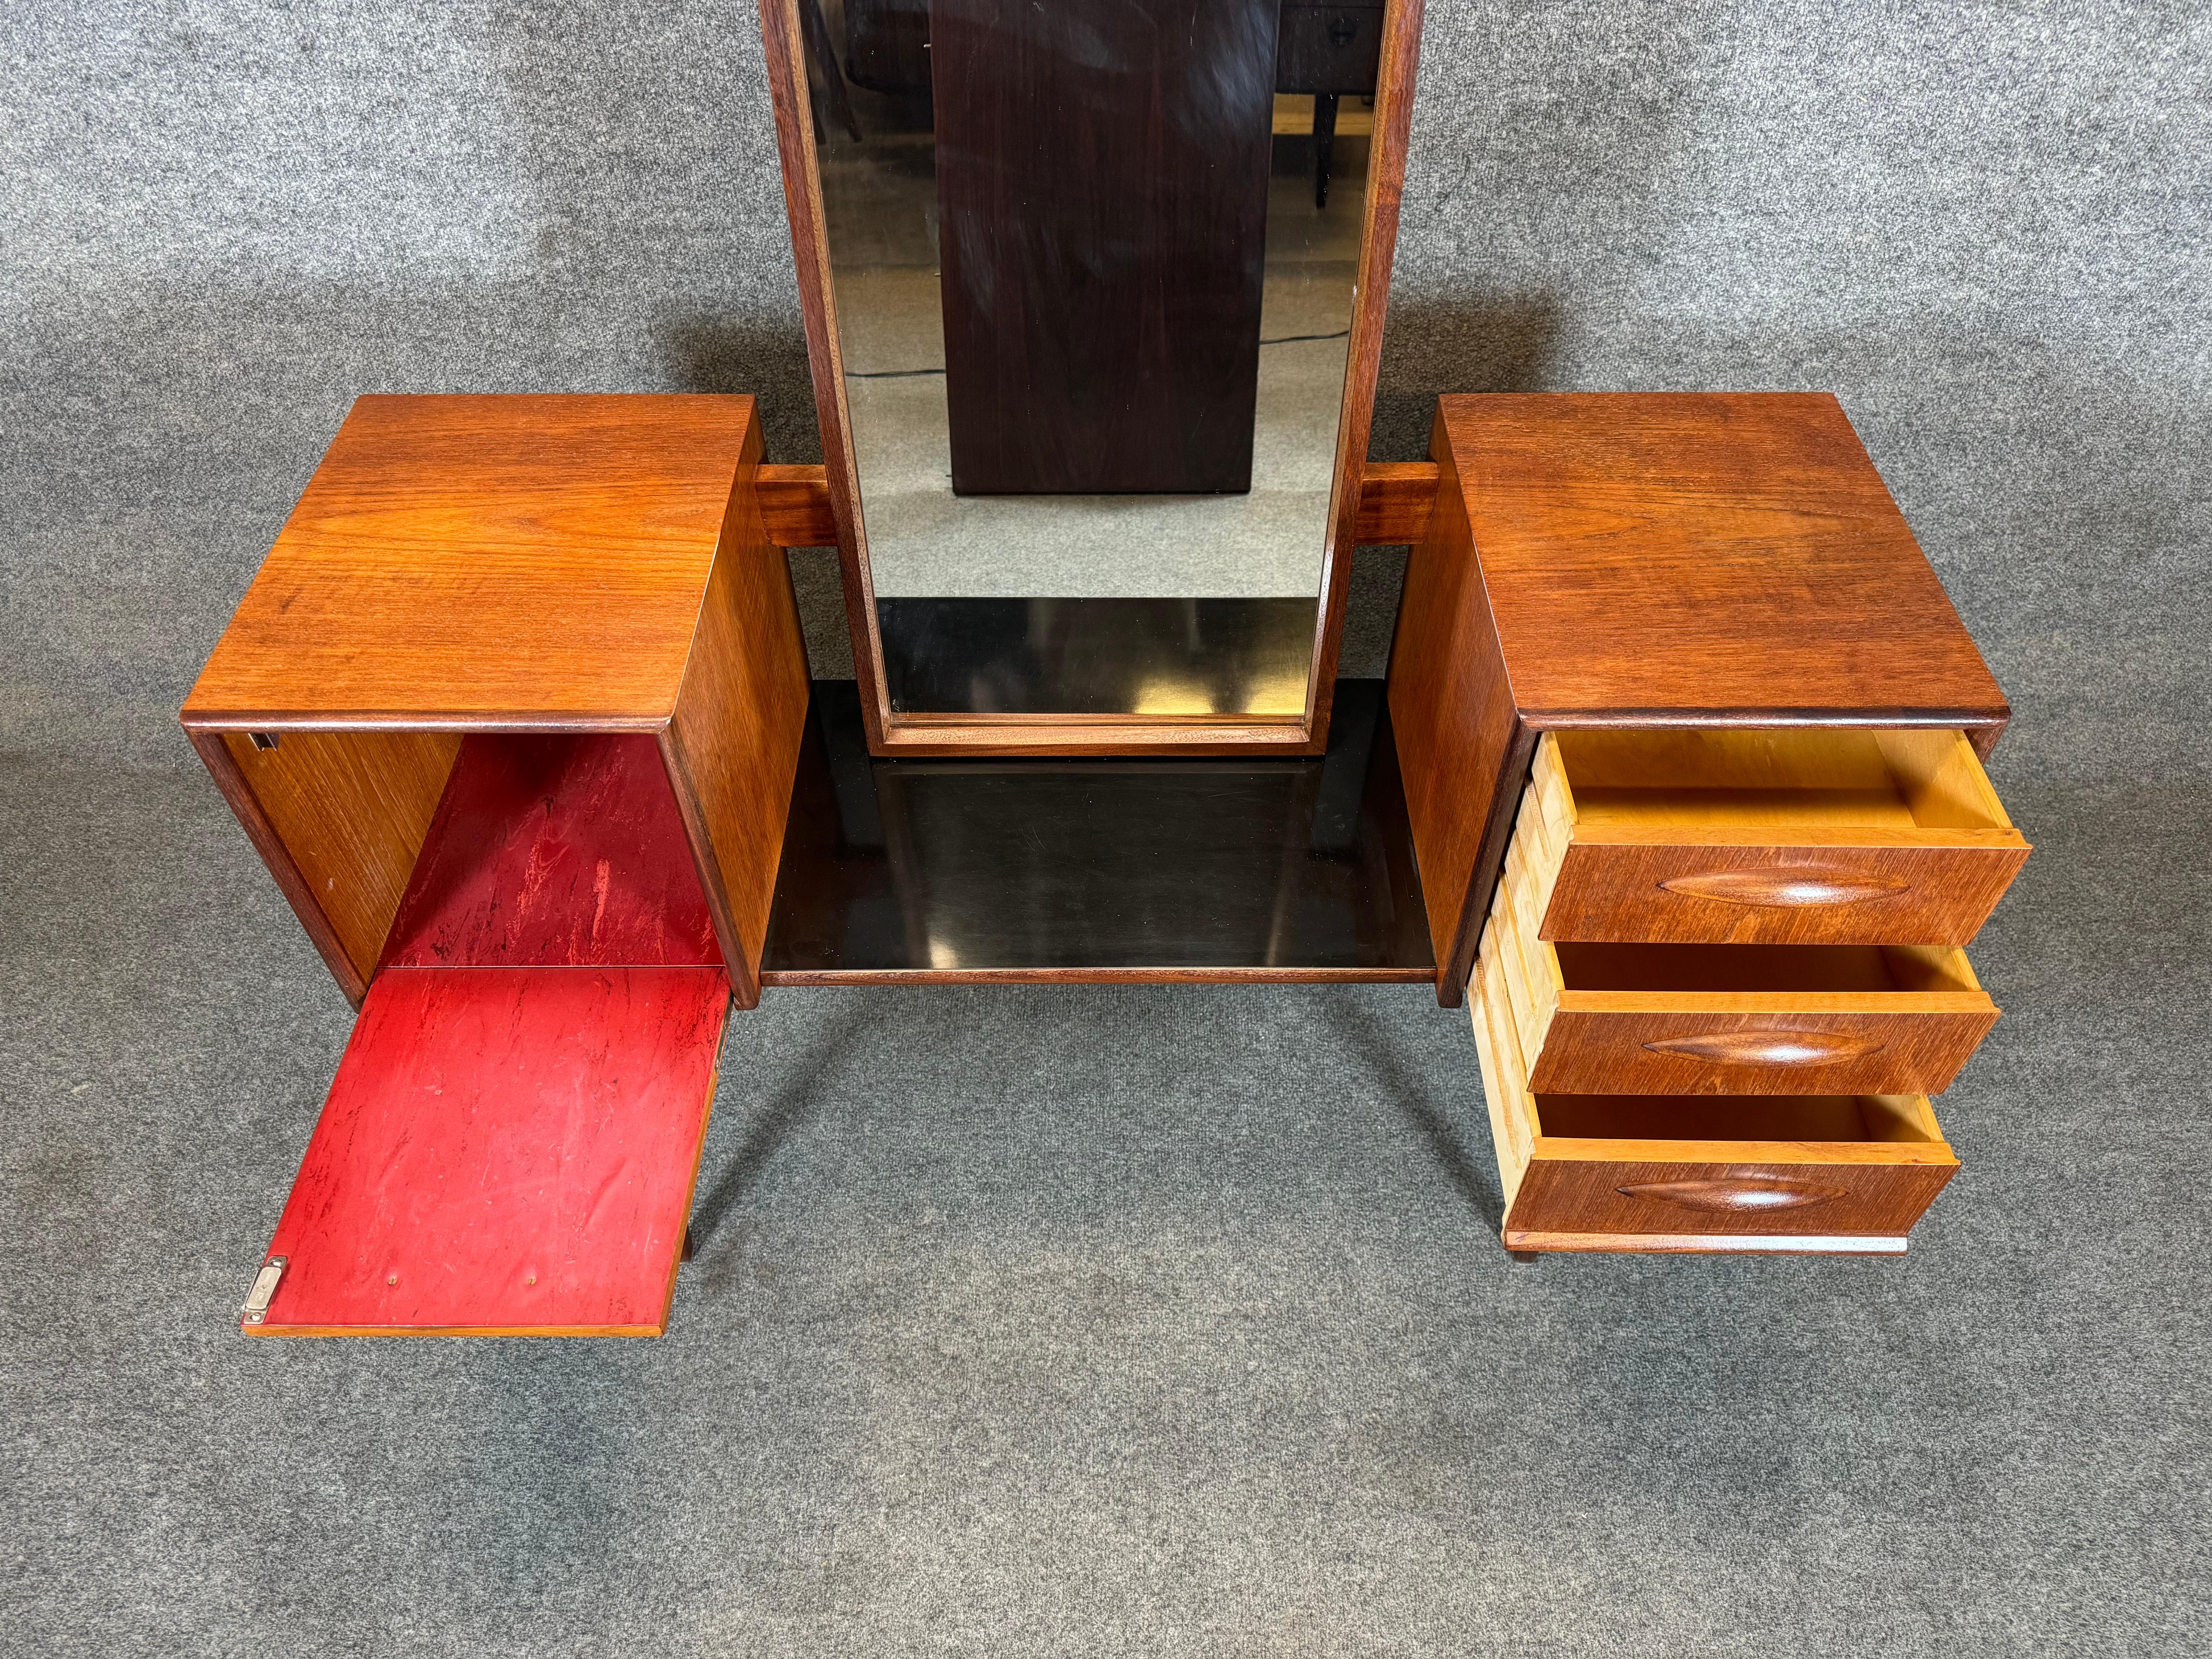 Here is a rare Scandinavian modern vanity in teak with its mirror manufactured in Denmark in the 1960's.
This lovely piece, recently imported from Europe to California before its refinishing, features vibrant wood grain, a long teak framed mirror, a